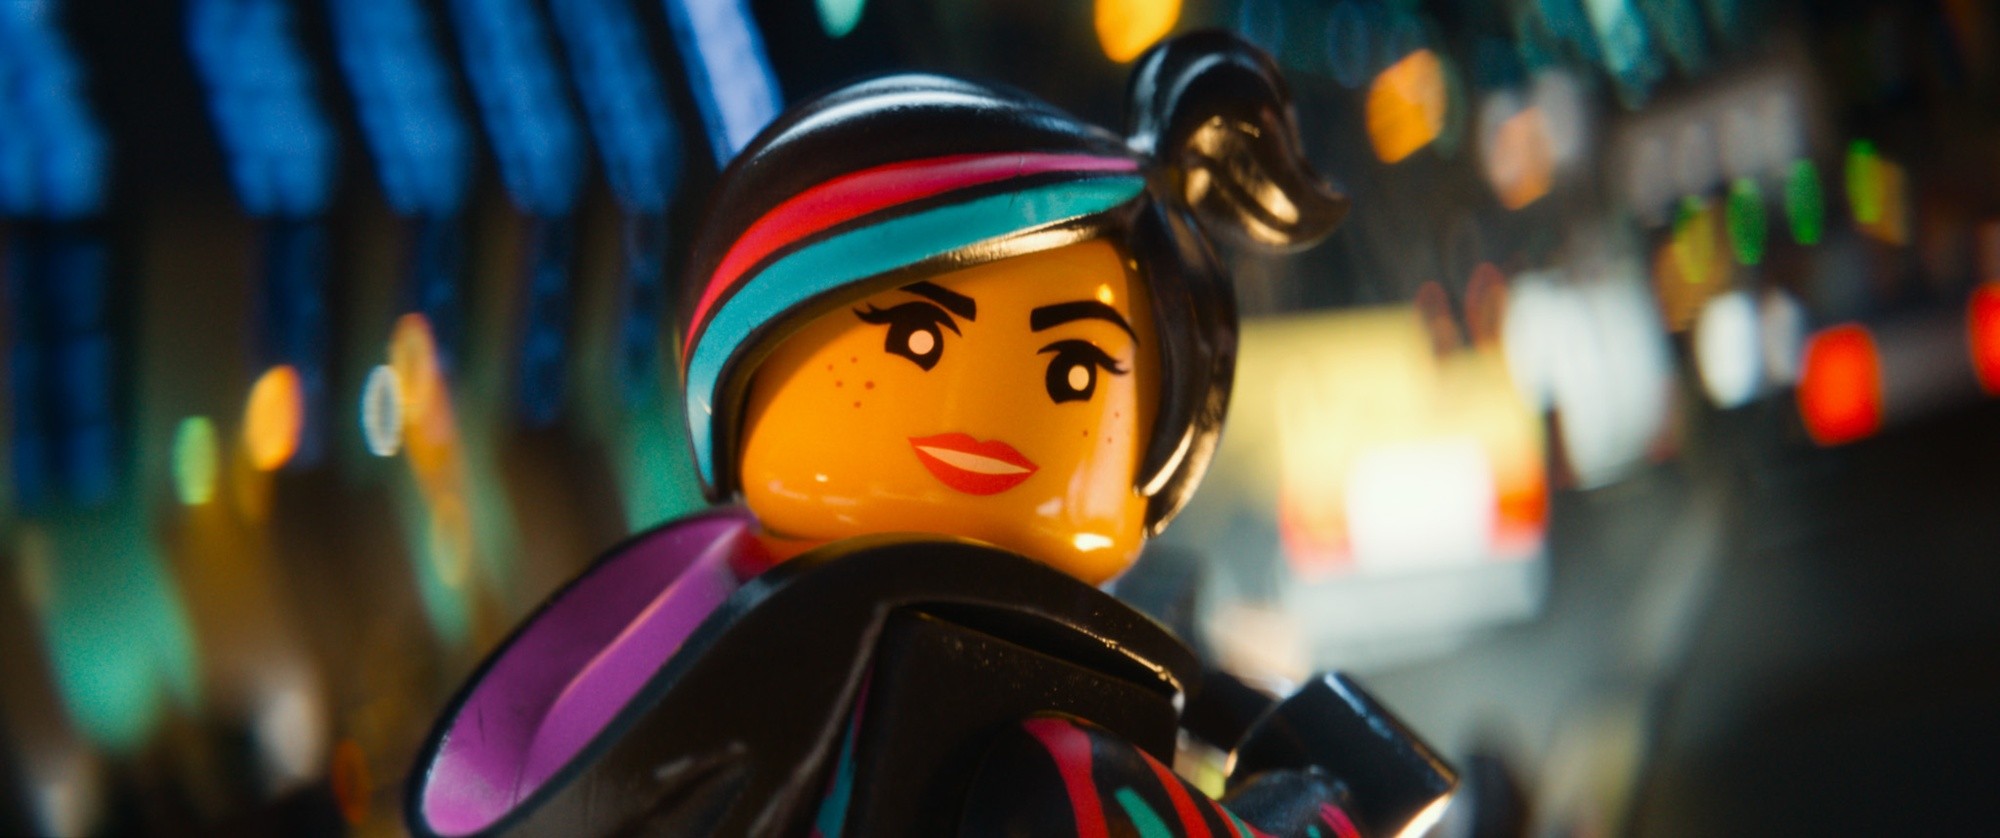 Lucy from Warner Bros. Pictures' The Lego Movie (2014)